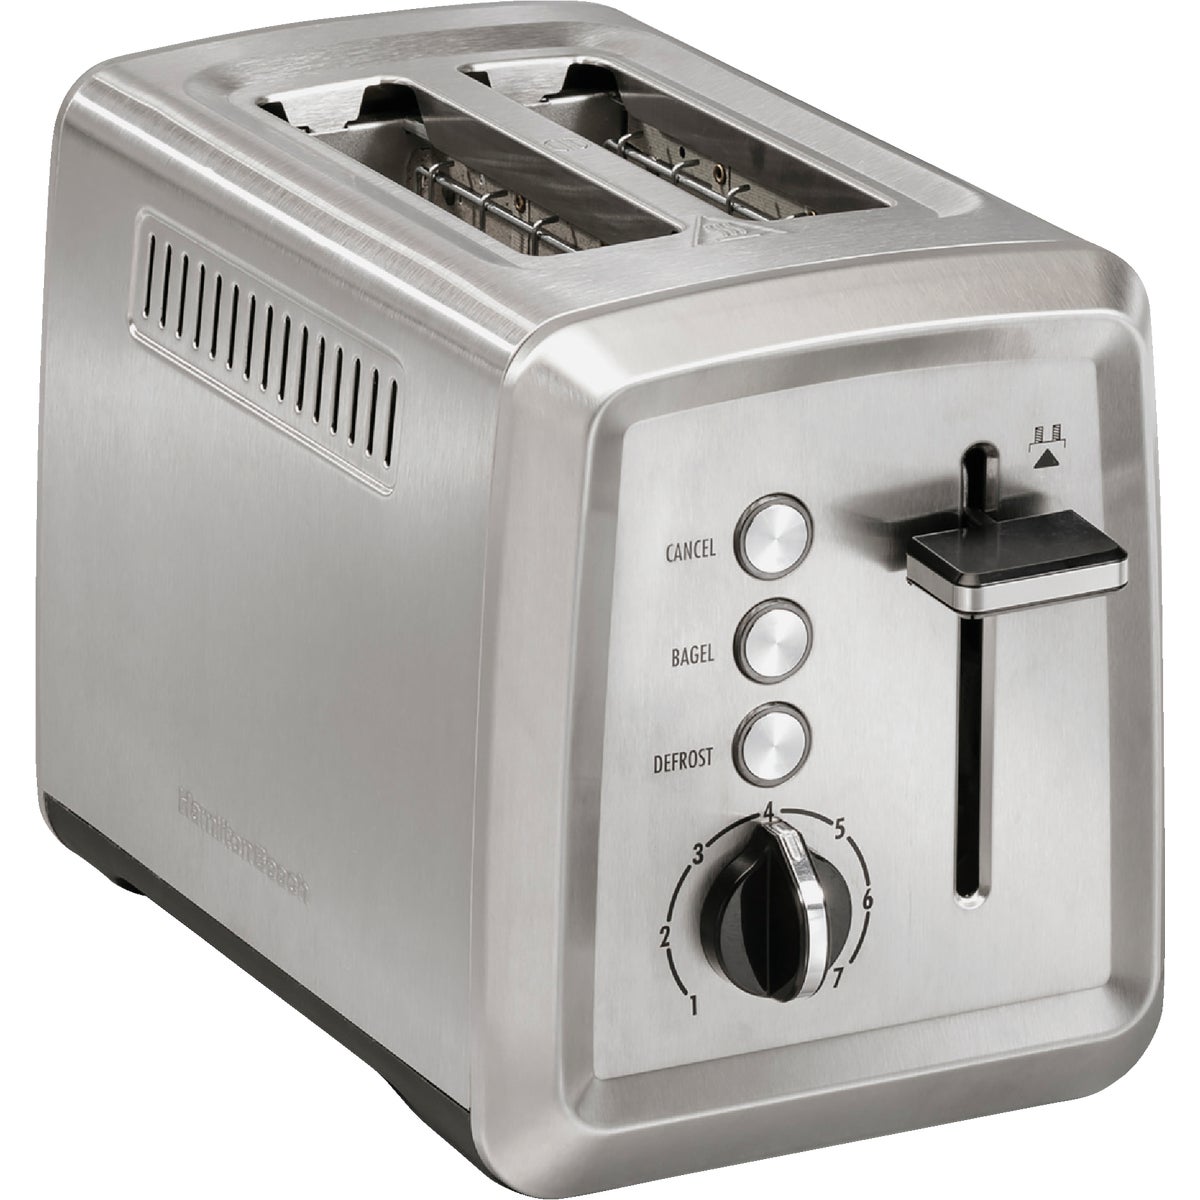 Item 650190, The Hamilton Beach Modern 2 Slice Stainless Steel Toaster with extra-wide 